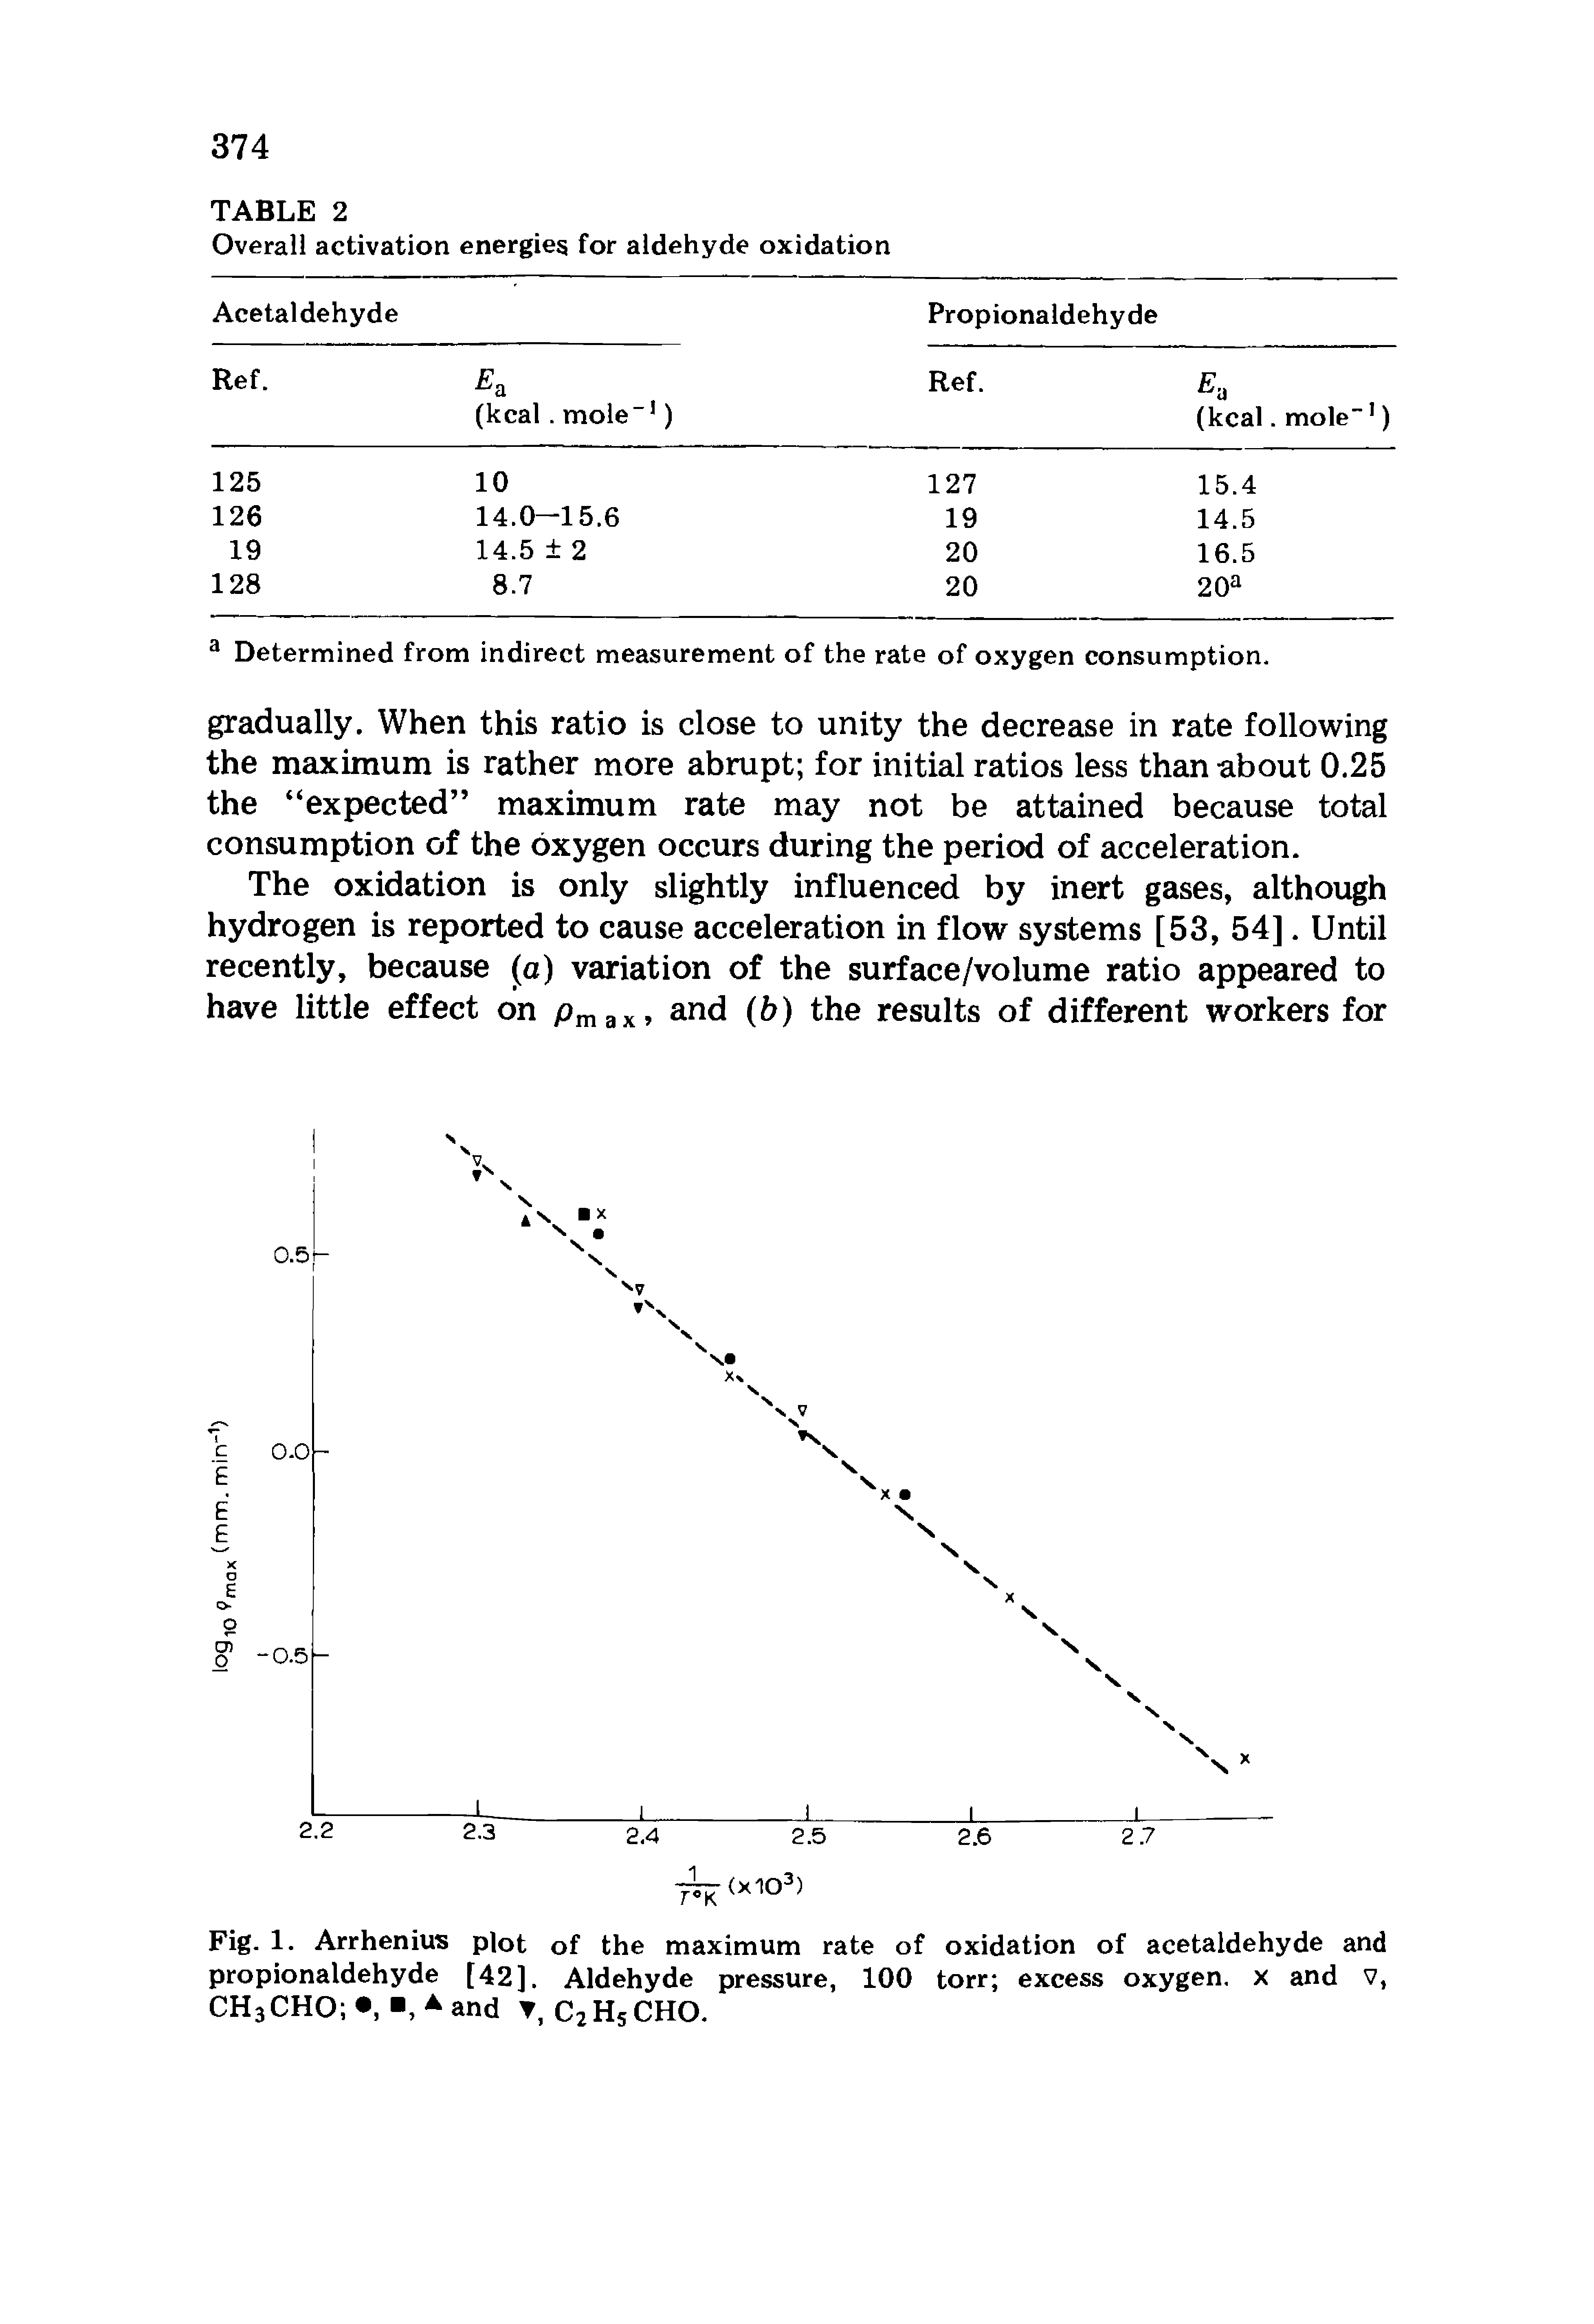 Fig. 1. Arrhenius plot of the maximum rate of oxidation of acetaldehyde and propionaldehyde [42]. Aldehyde pressure, 100 torr excess oxygen, x and v, CHaCHO , ,- and , C2H5CHO.